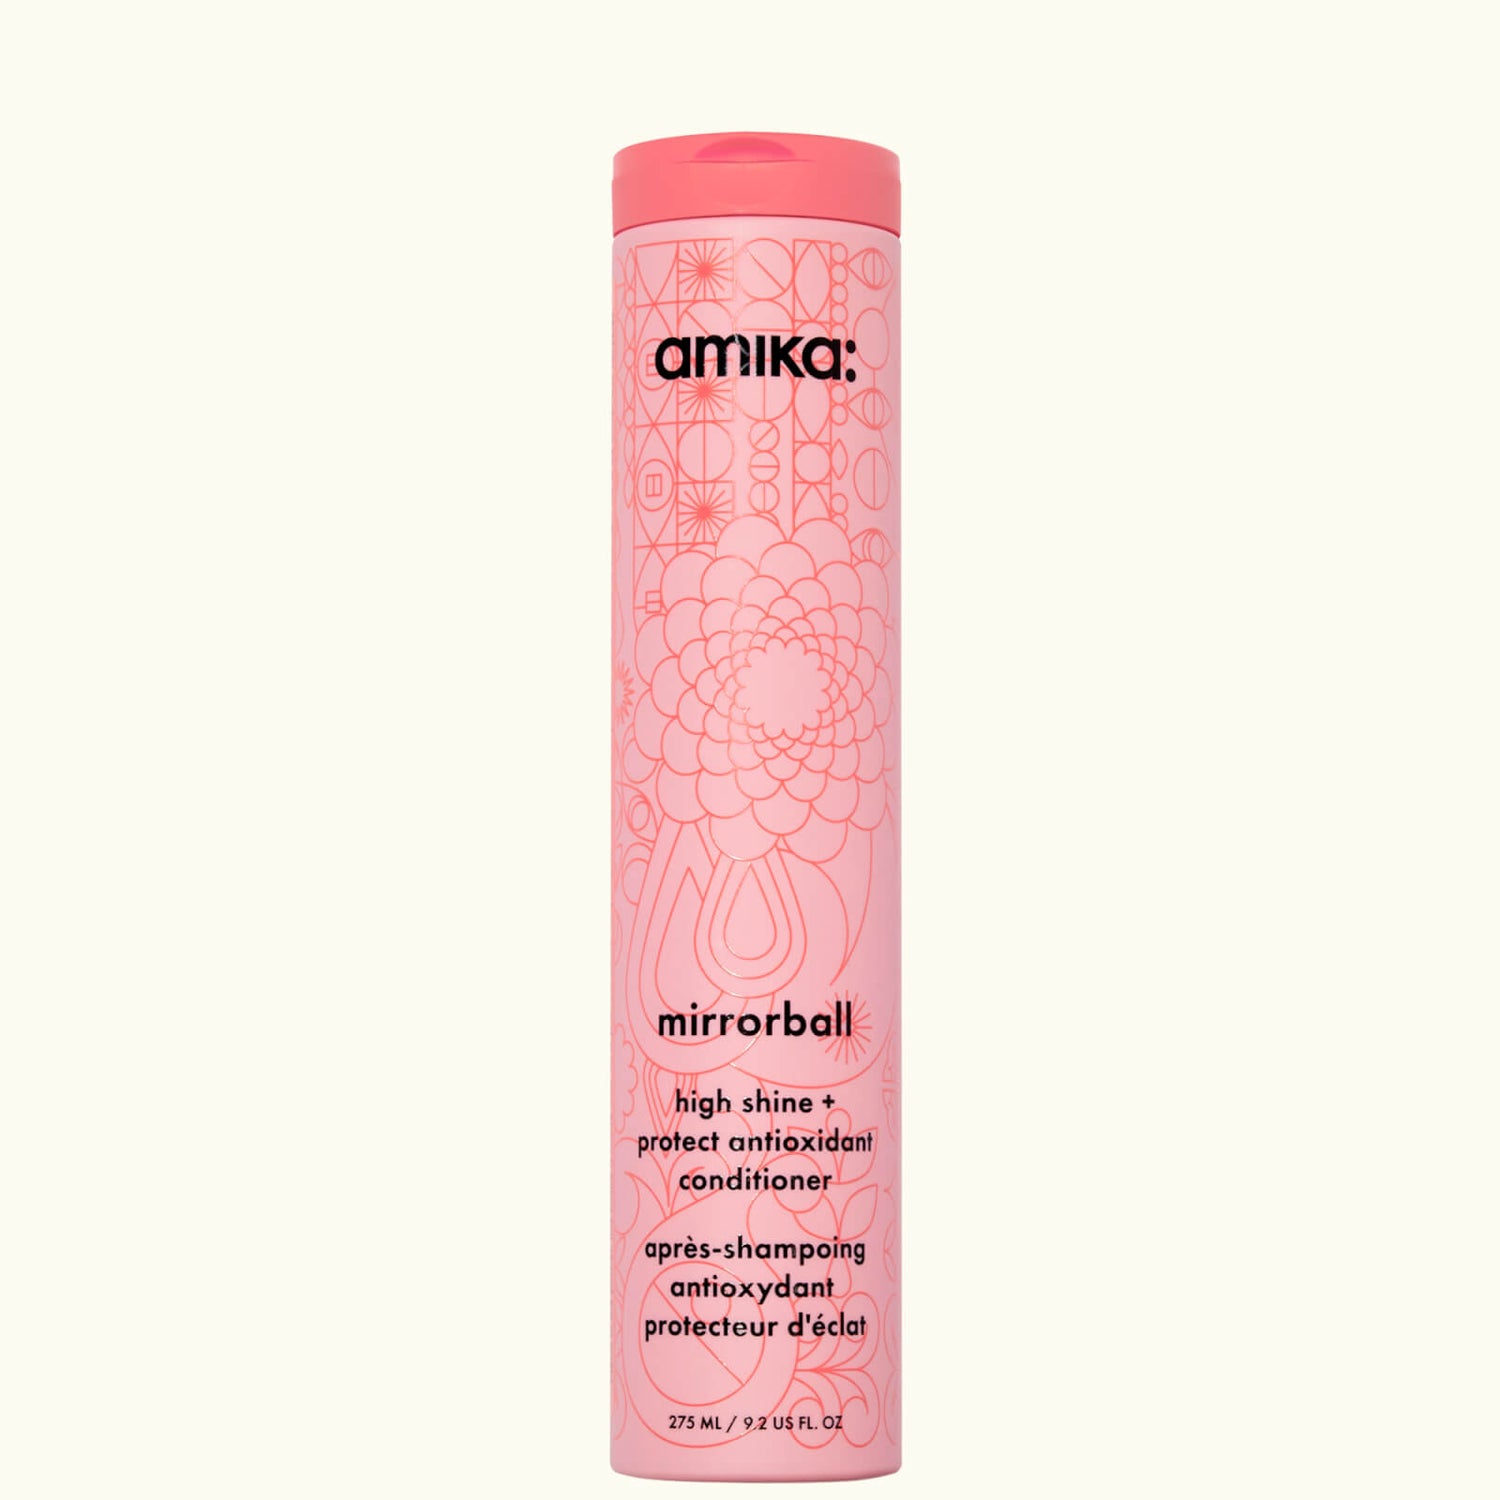 mirrorball high shine + protect antioxidant conditioner